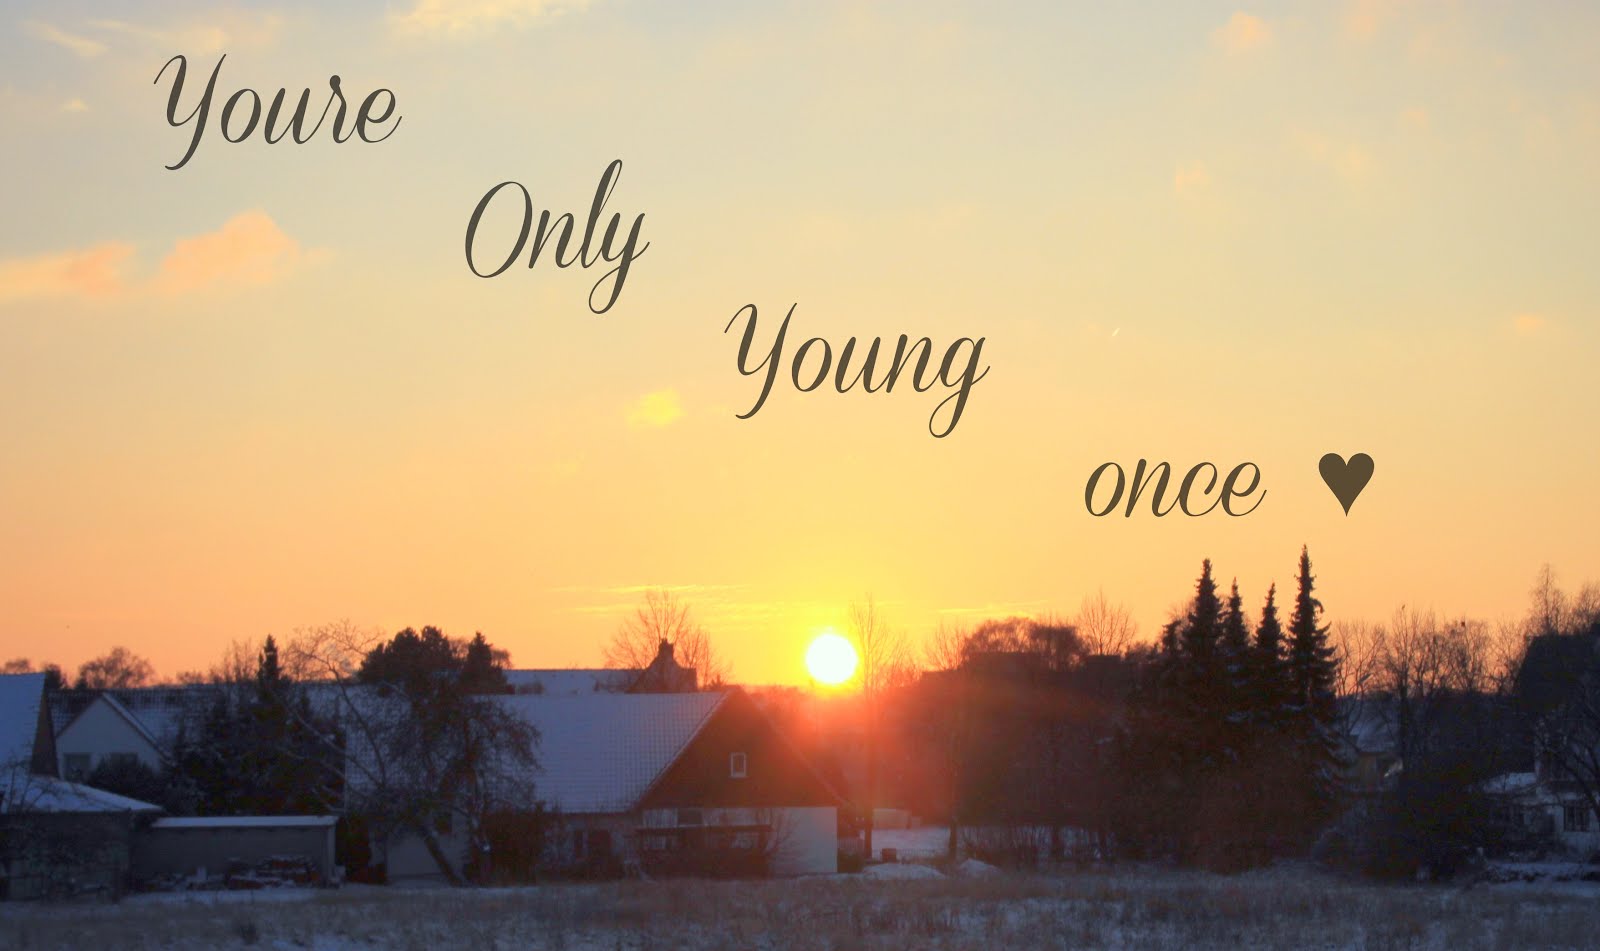 Youre only young once ♥